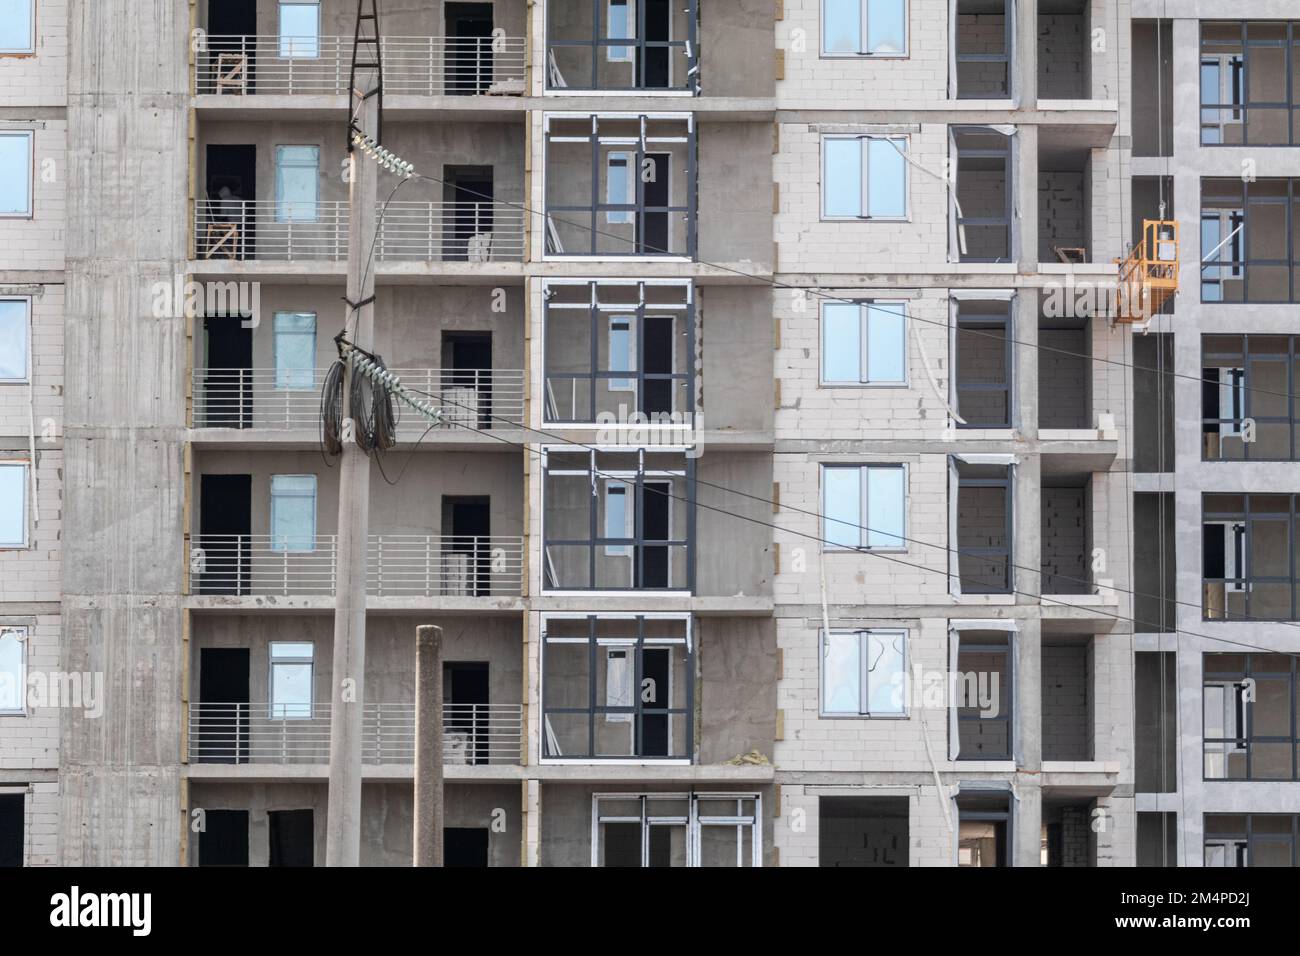 Multistory residential white brick building facade construction site, outdoor architecture details pattern Stock Photo